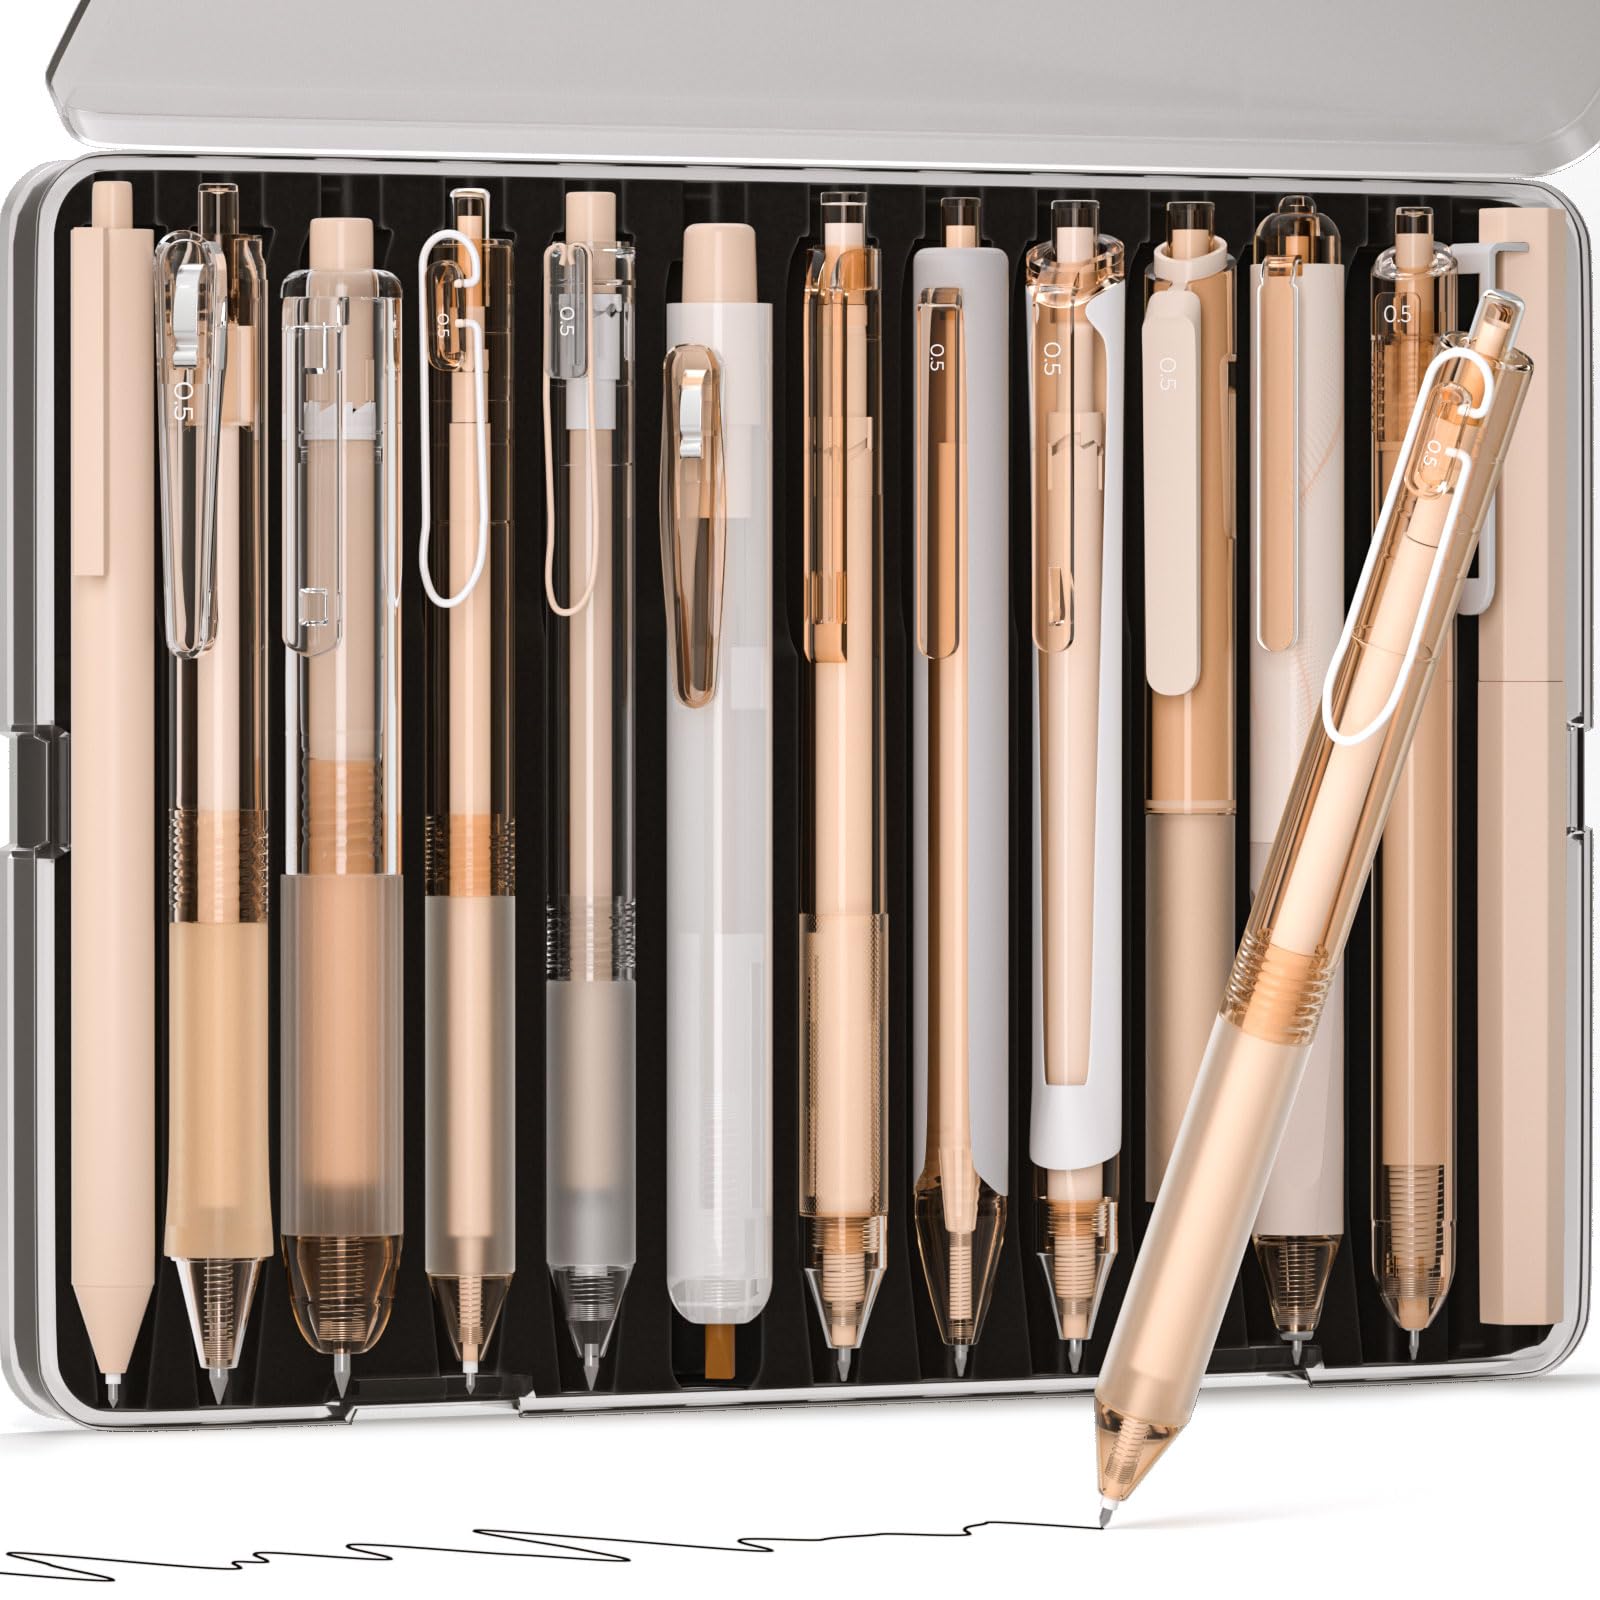 Nicpro 13PCS Pastel Gel Ink Pen Set with Case, 1 Highlighter Cute 0.5mm Fine Point Retractable 12PCS Black, Aesthetic Pens for School Student Note Taking,Writing, Office Supplies(Brown)